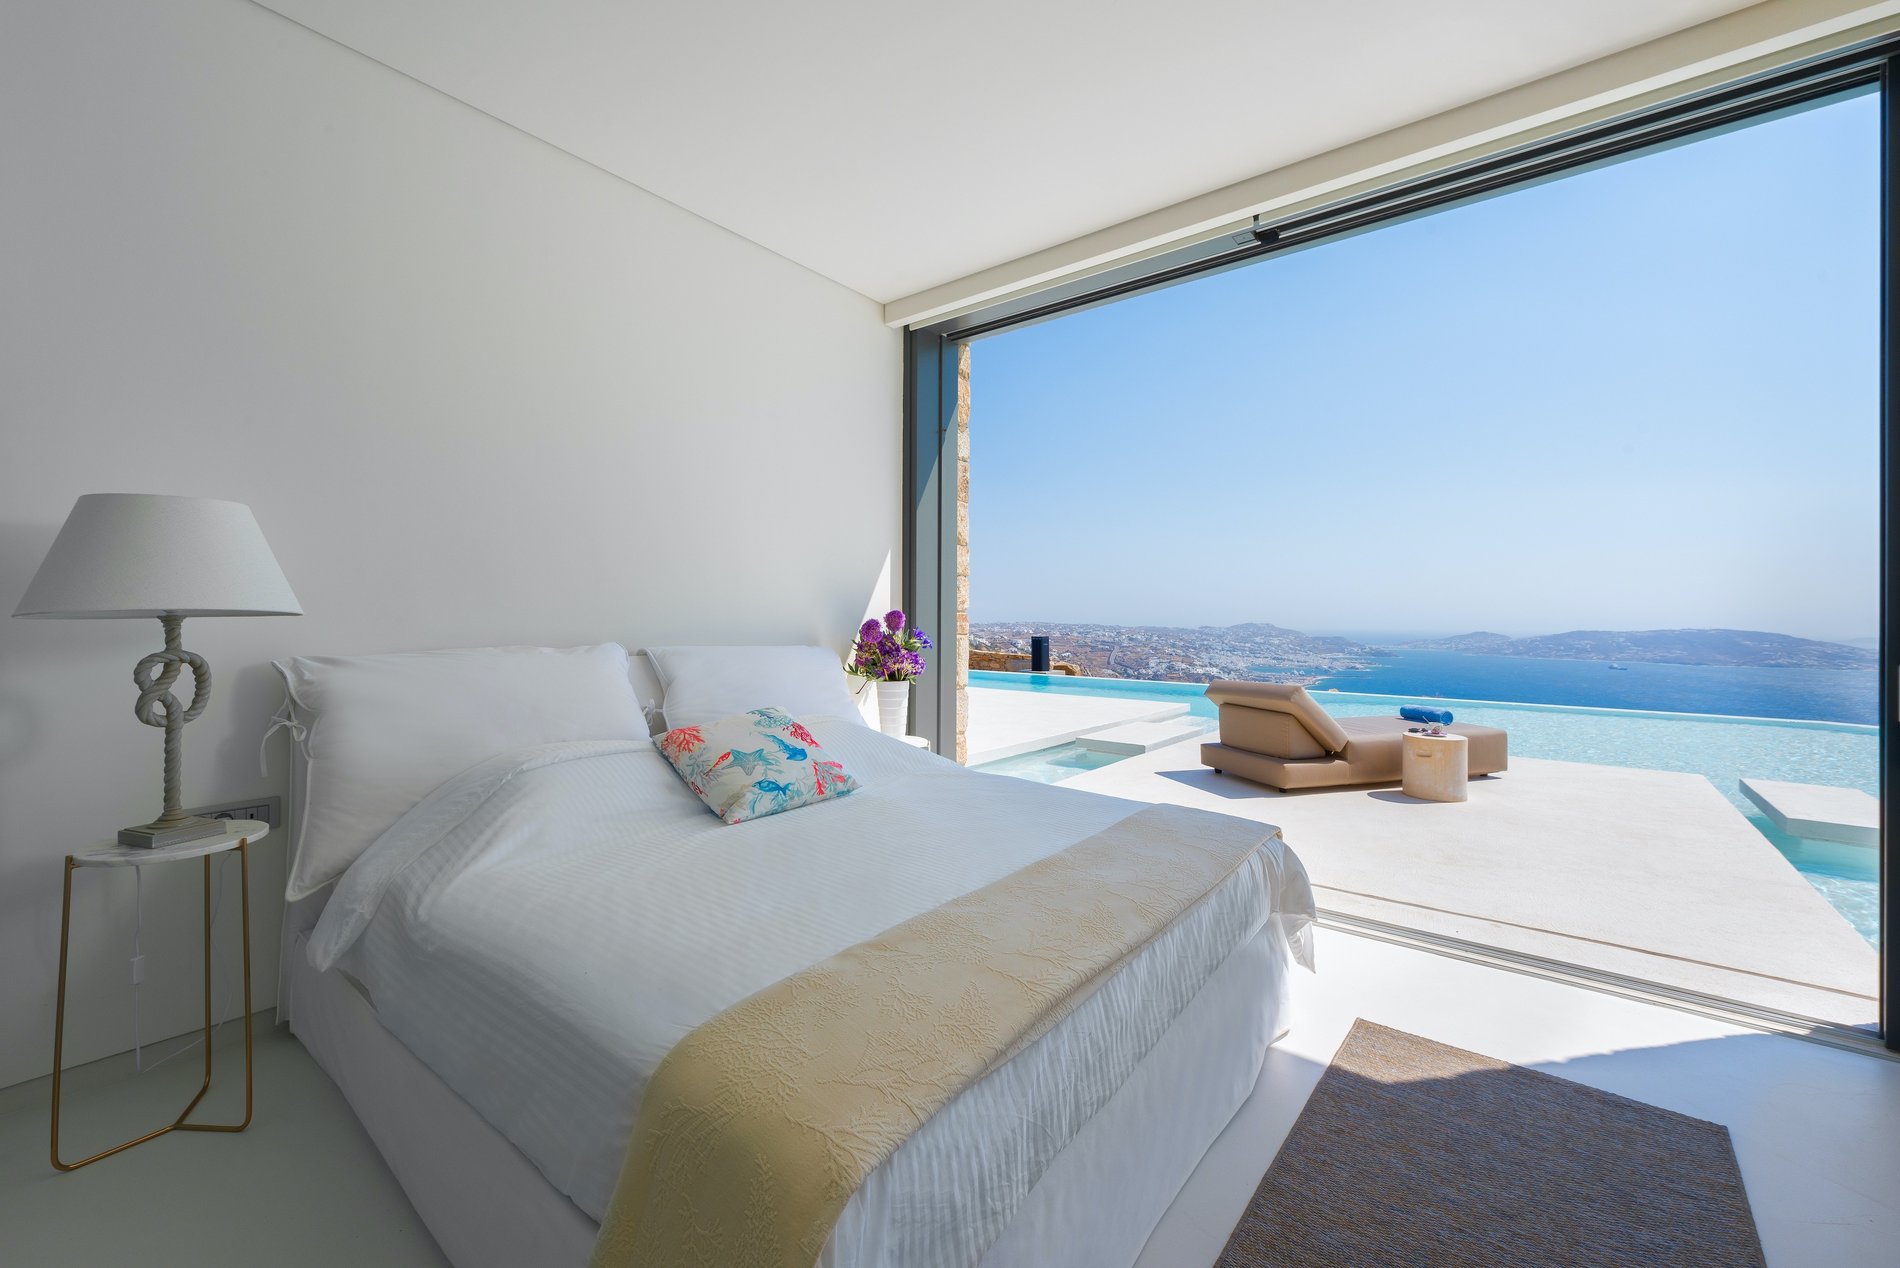 Bedroom with walkout out access to the infinity pool.